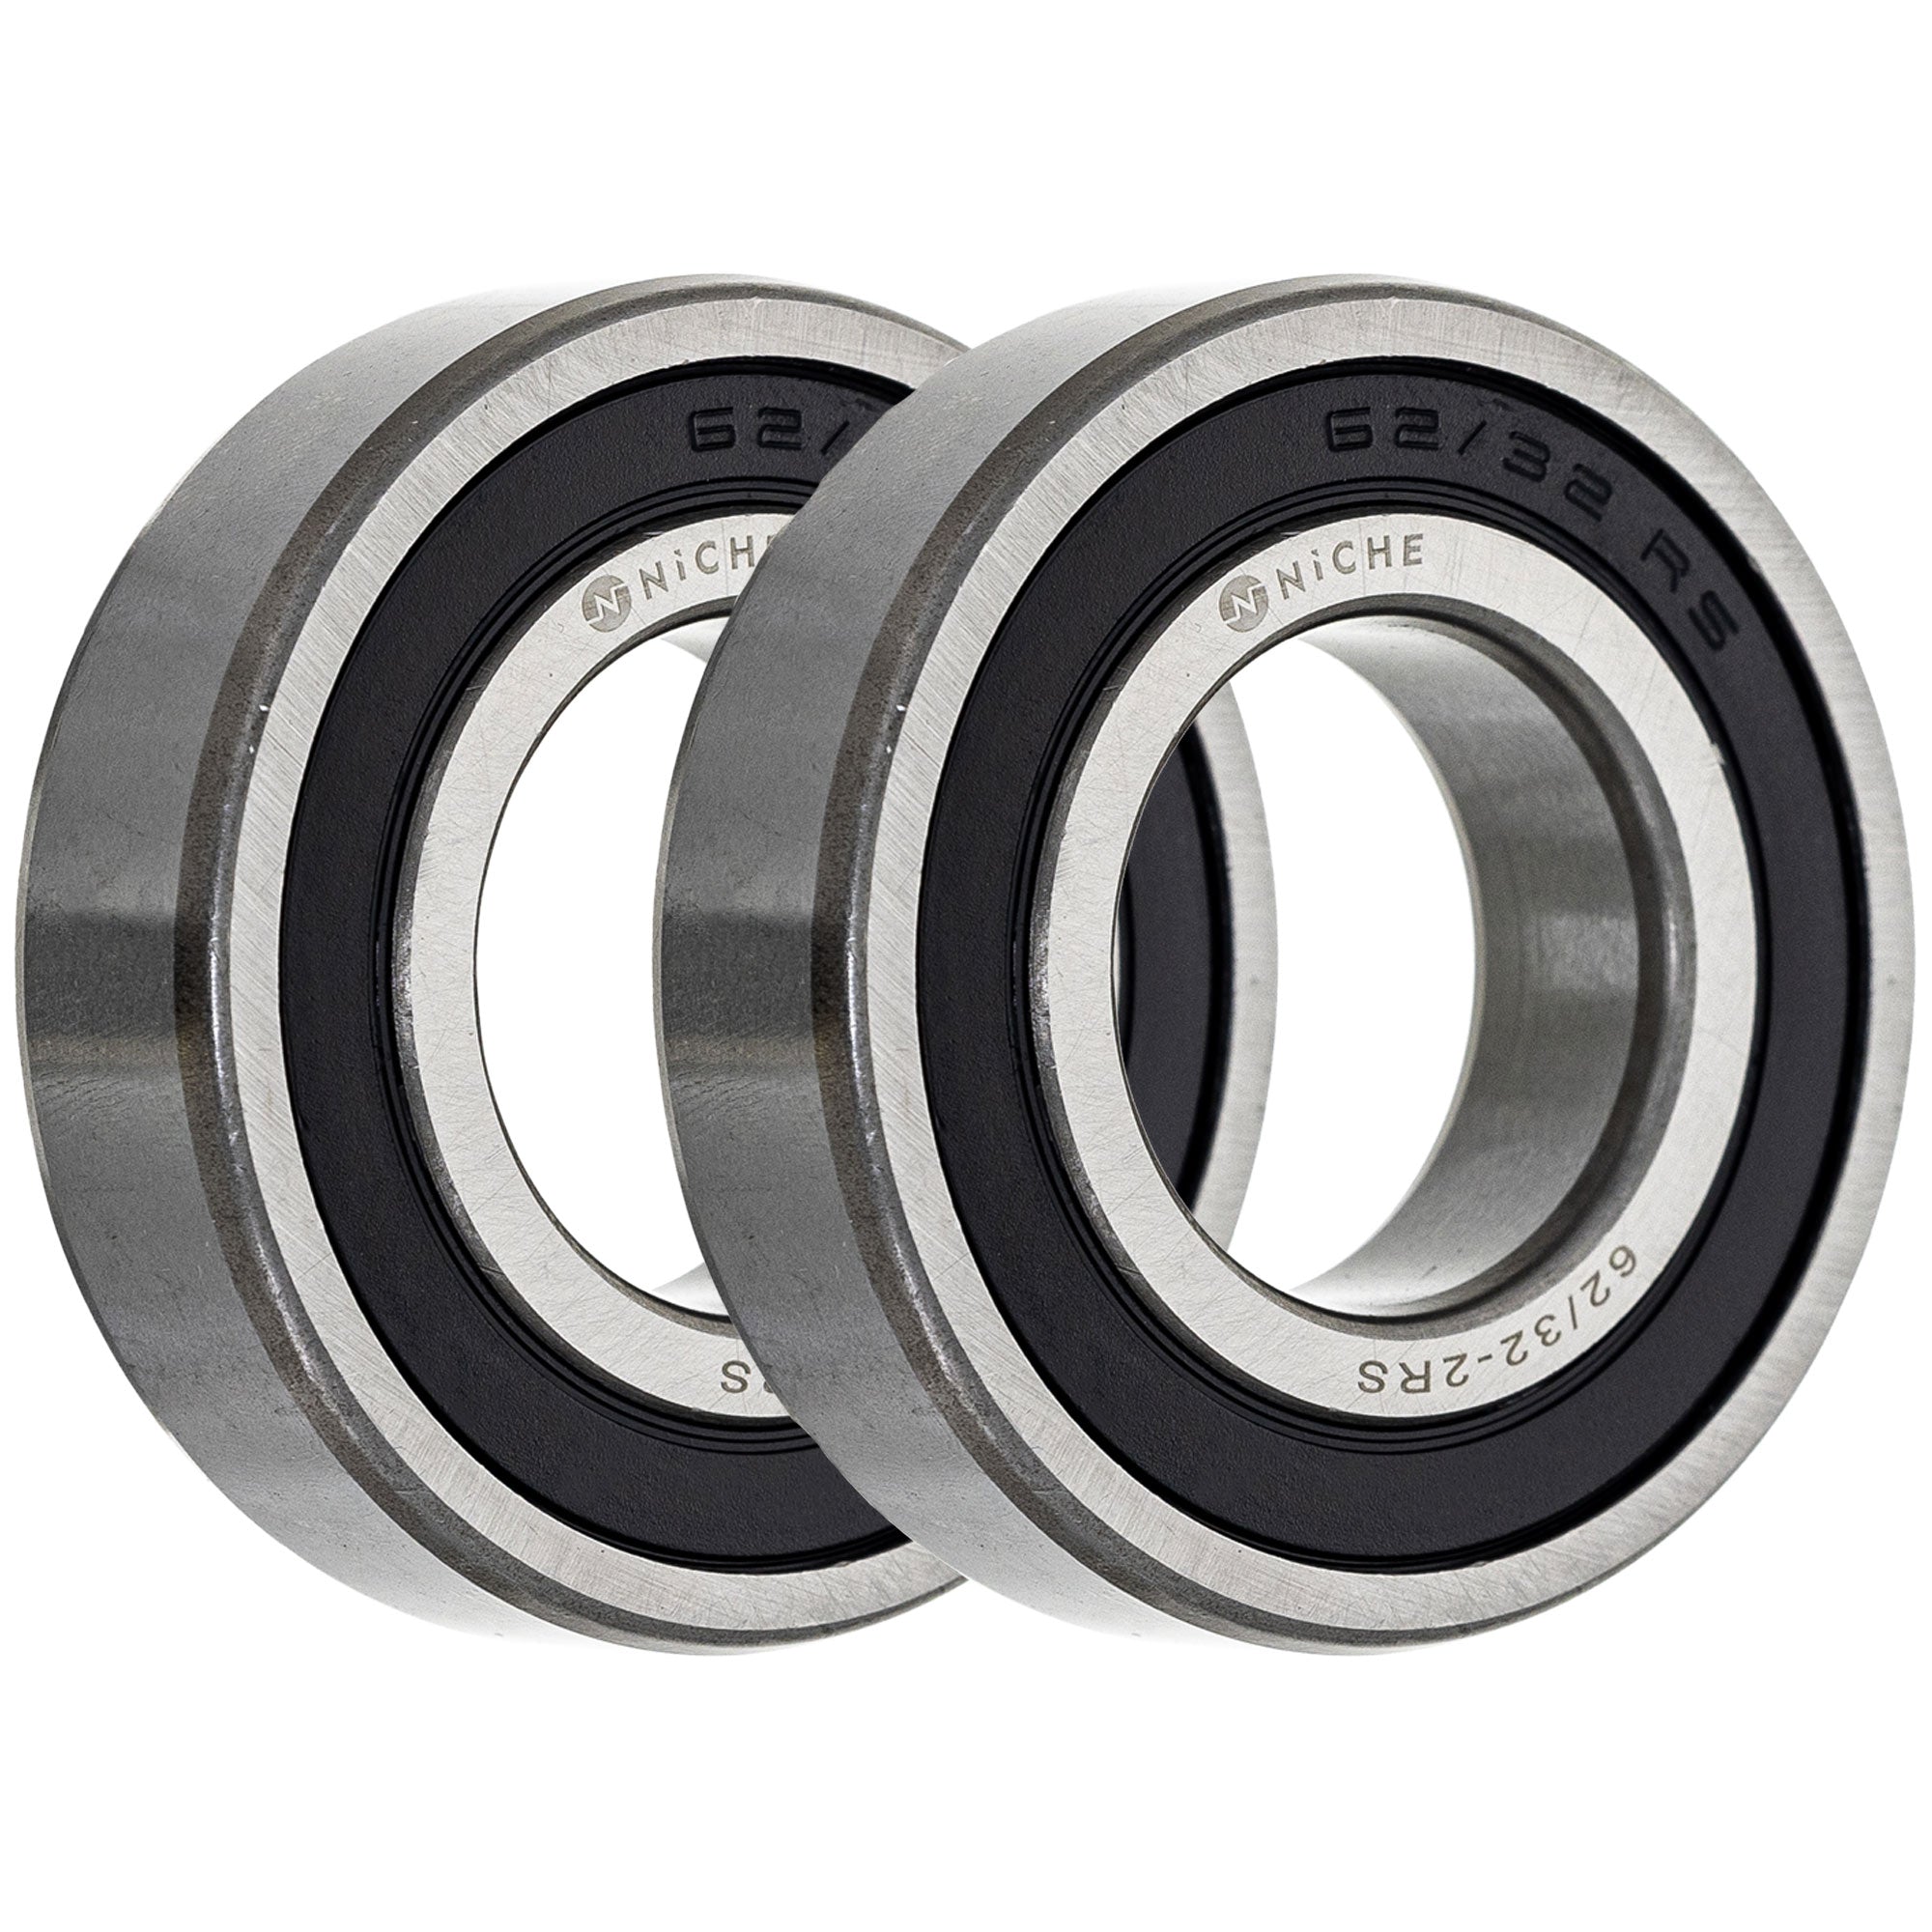 Single Row, Deep Groove, Ball Bearing Pack of 2 2-Pack for zOTHER KFX80 NICHE 519-CBB2282R